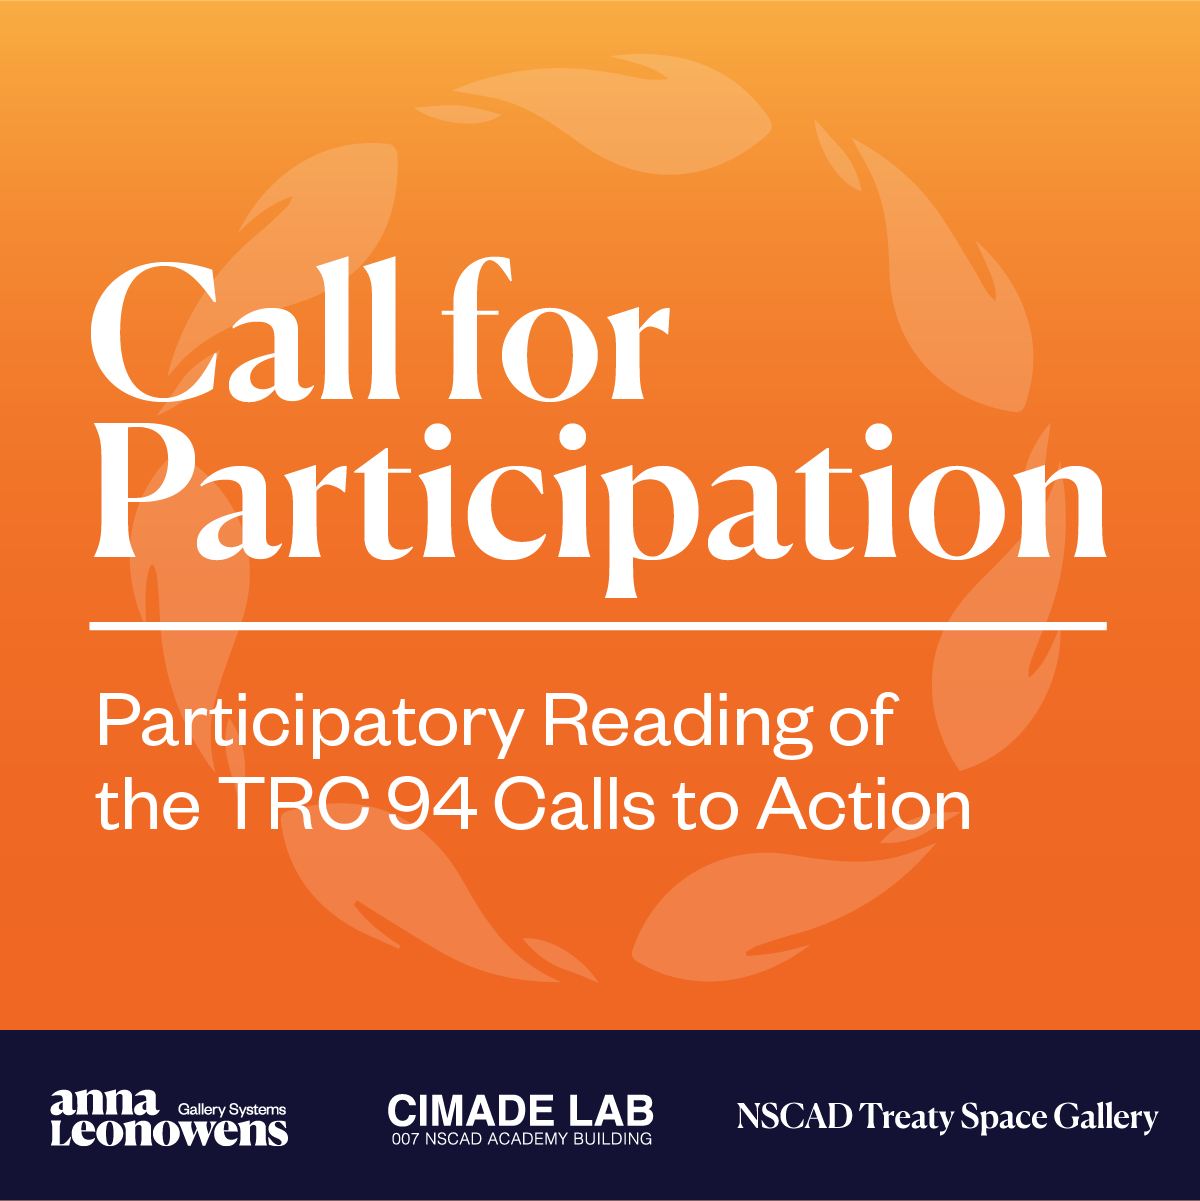 Orange background with white text reading "Call for Participation: Participatory Reading of the TRC 94 Calls to Action". Navy blue bottom border with white logos of Anna Leonowens Gallery Systems, CiMADE Lab, and NSCAD Treaty Space Gallery.